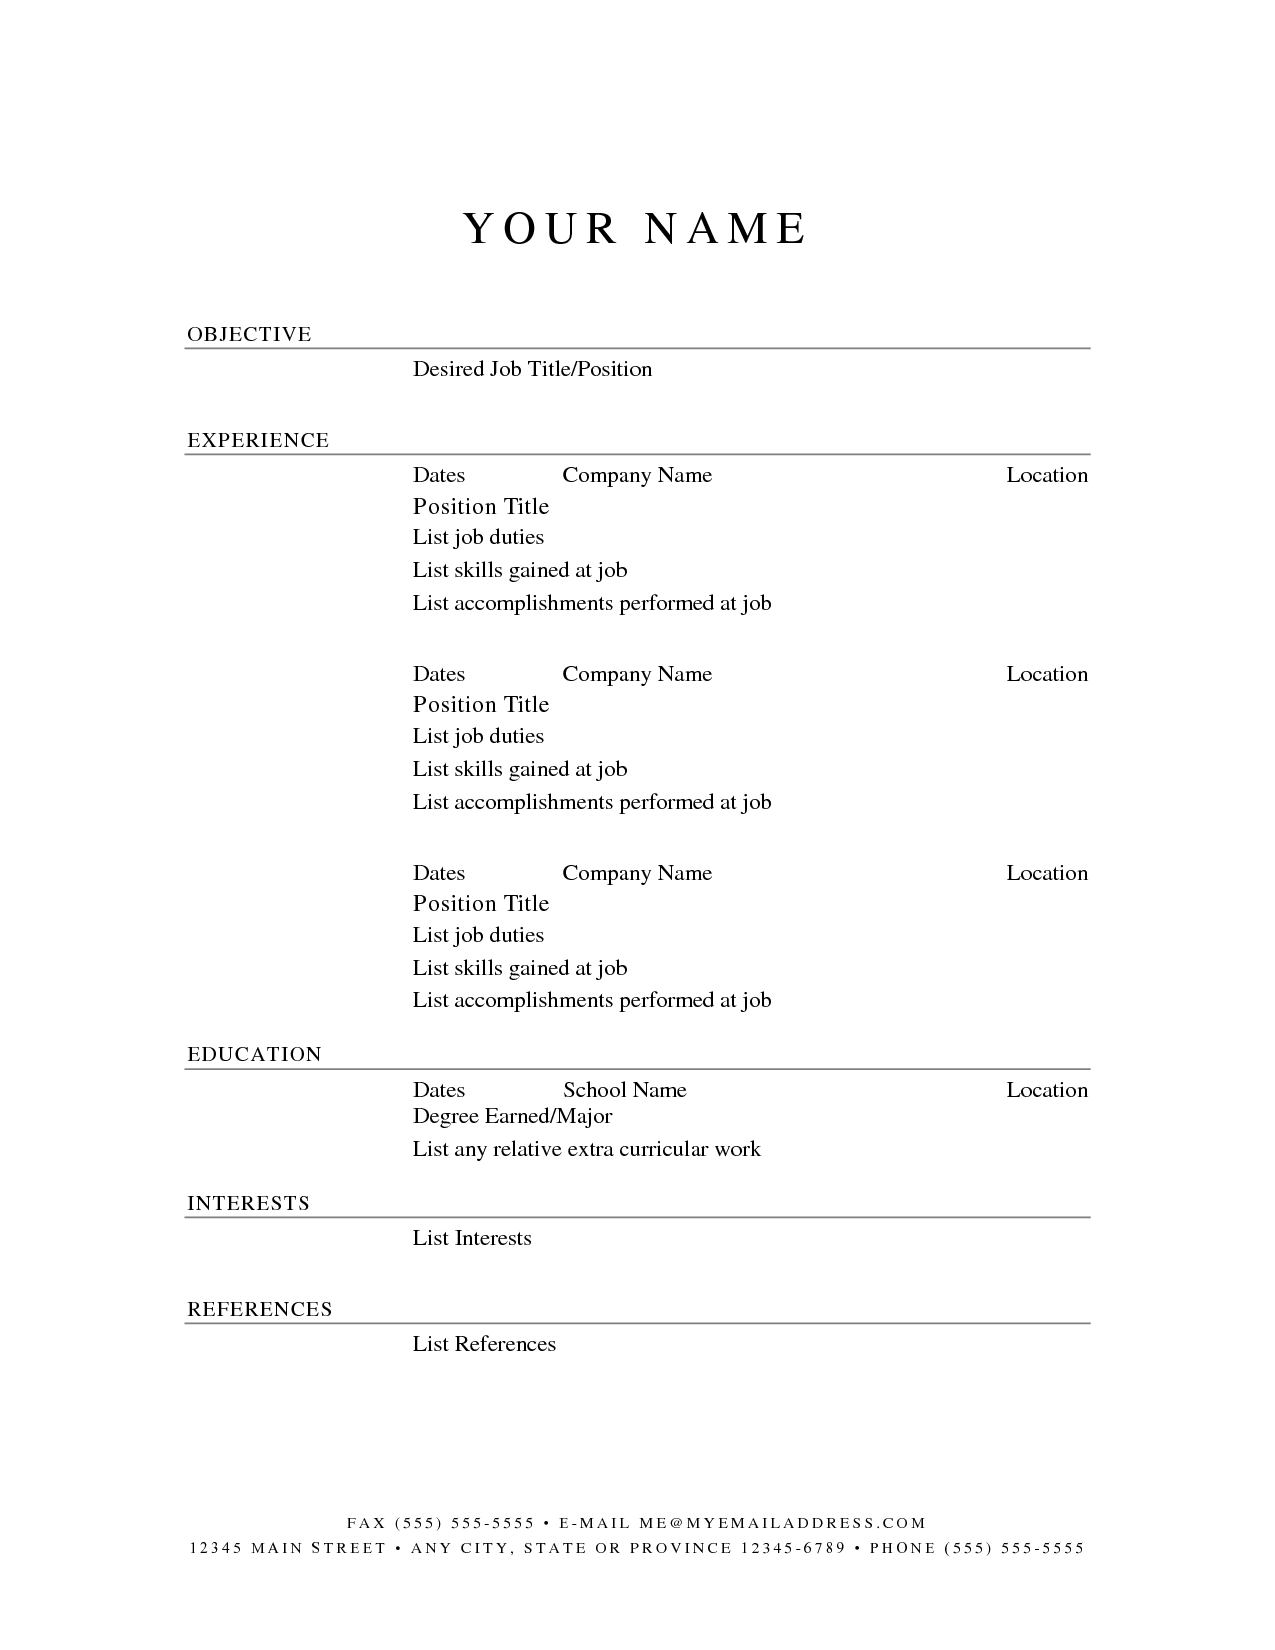 Fill In The Blank Free Blank Resume Templates Beautiful Resume 